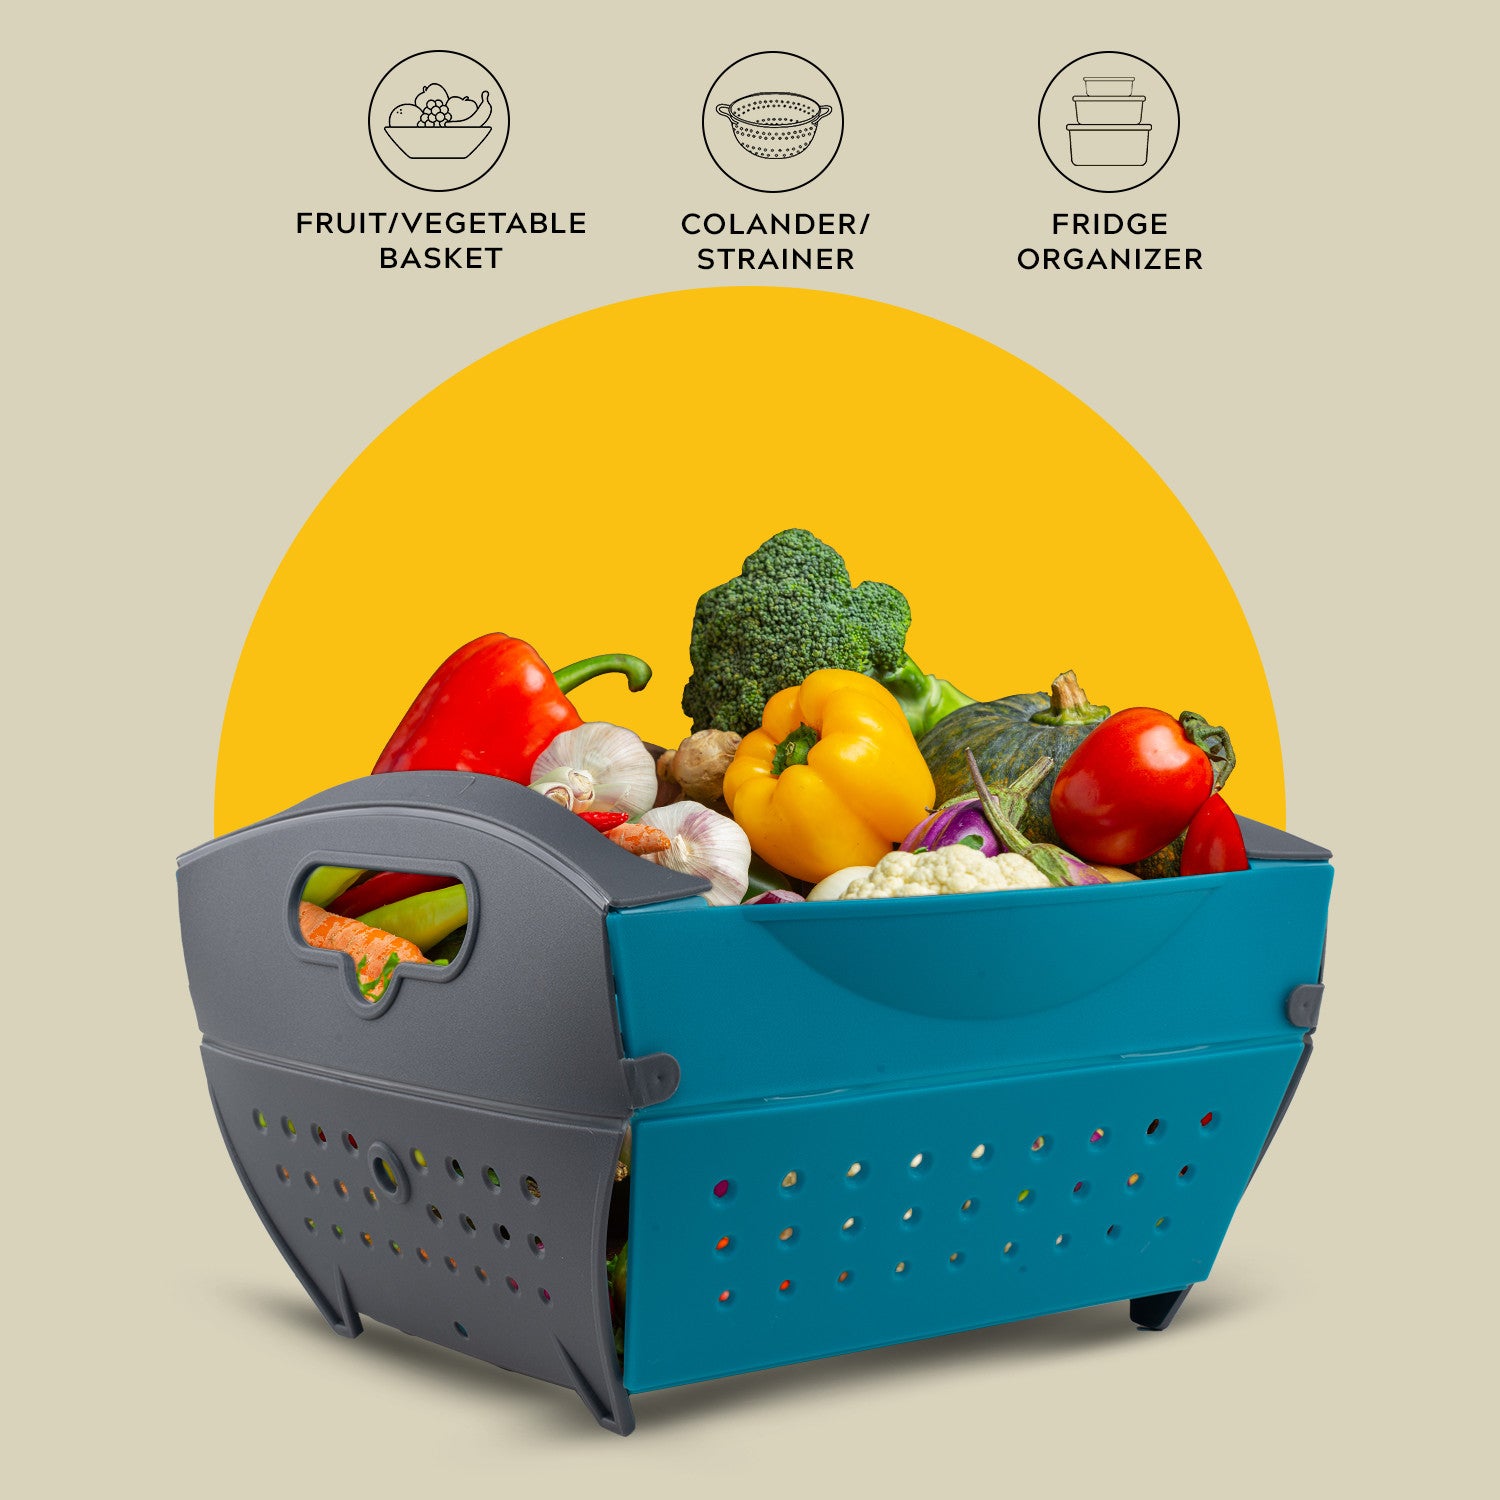 Collapsible Fruits & Vegetable Basket